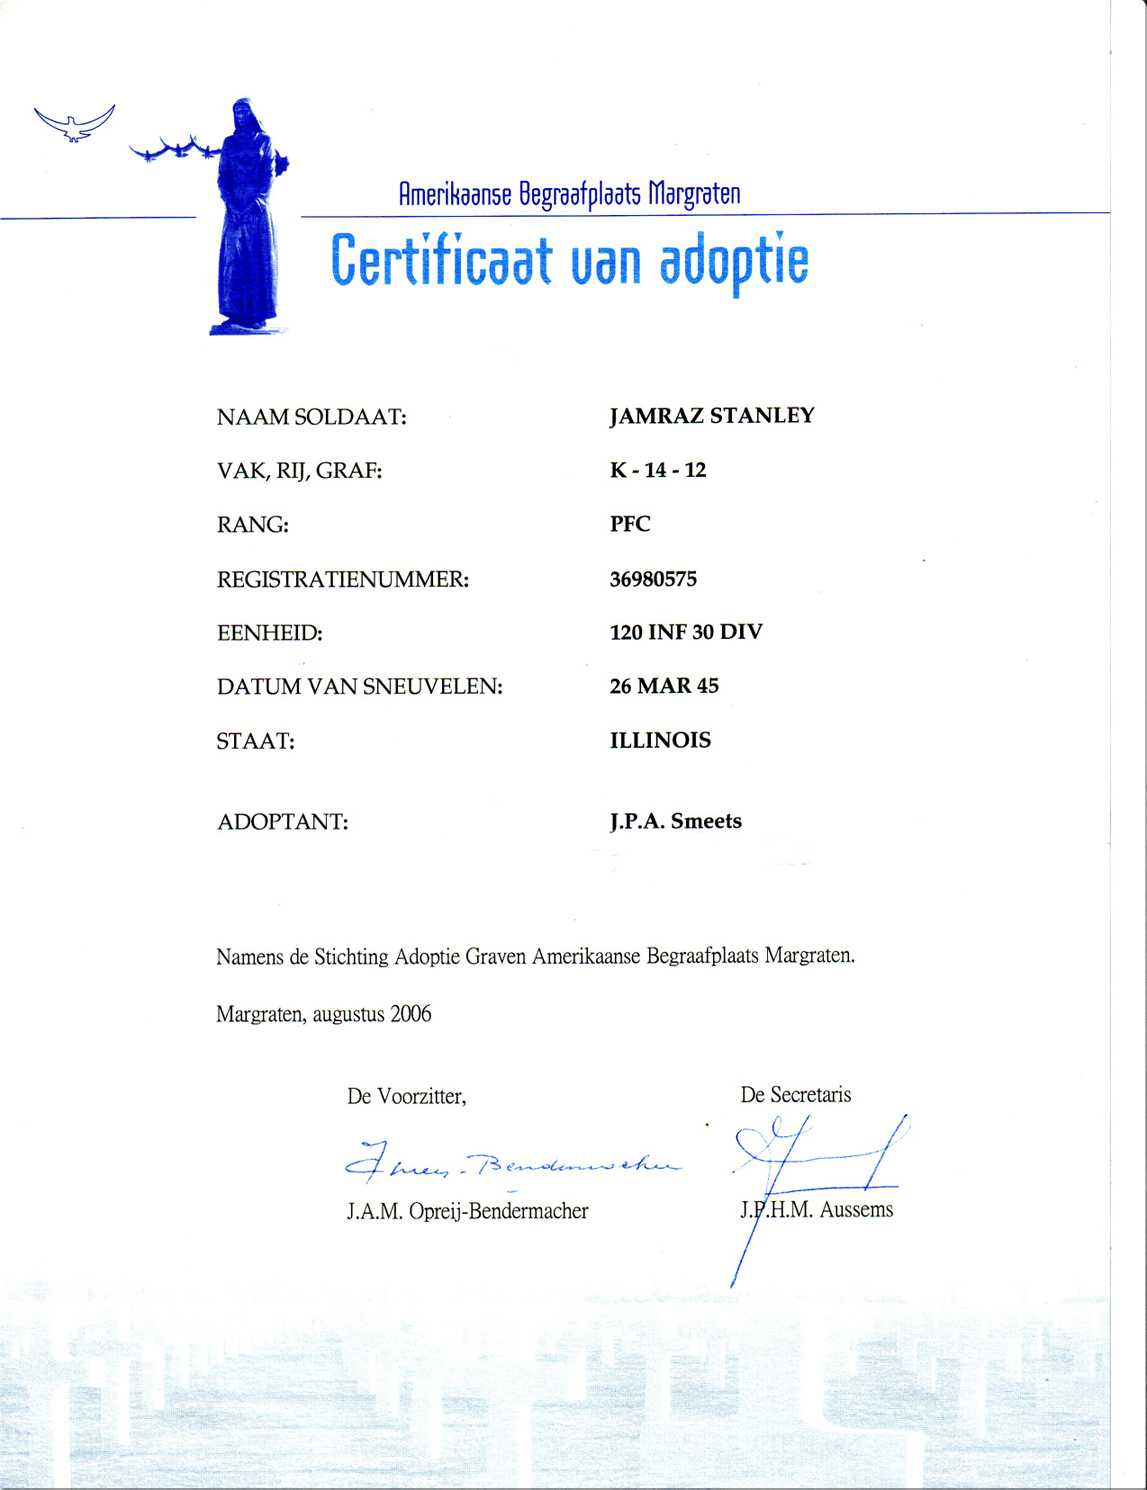 The adoption certificate